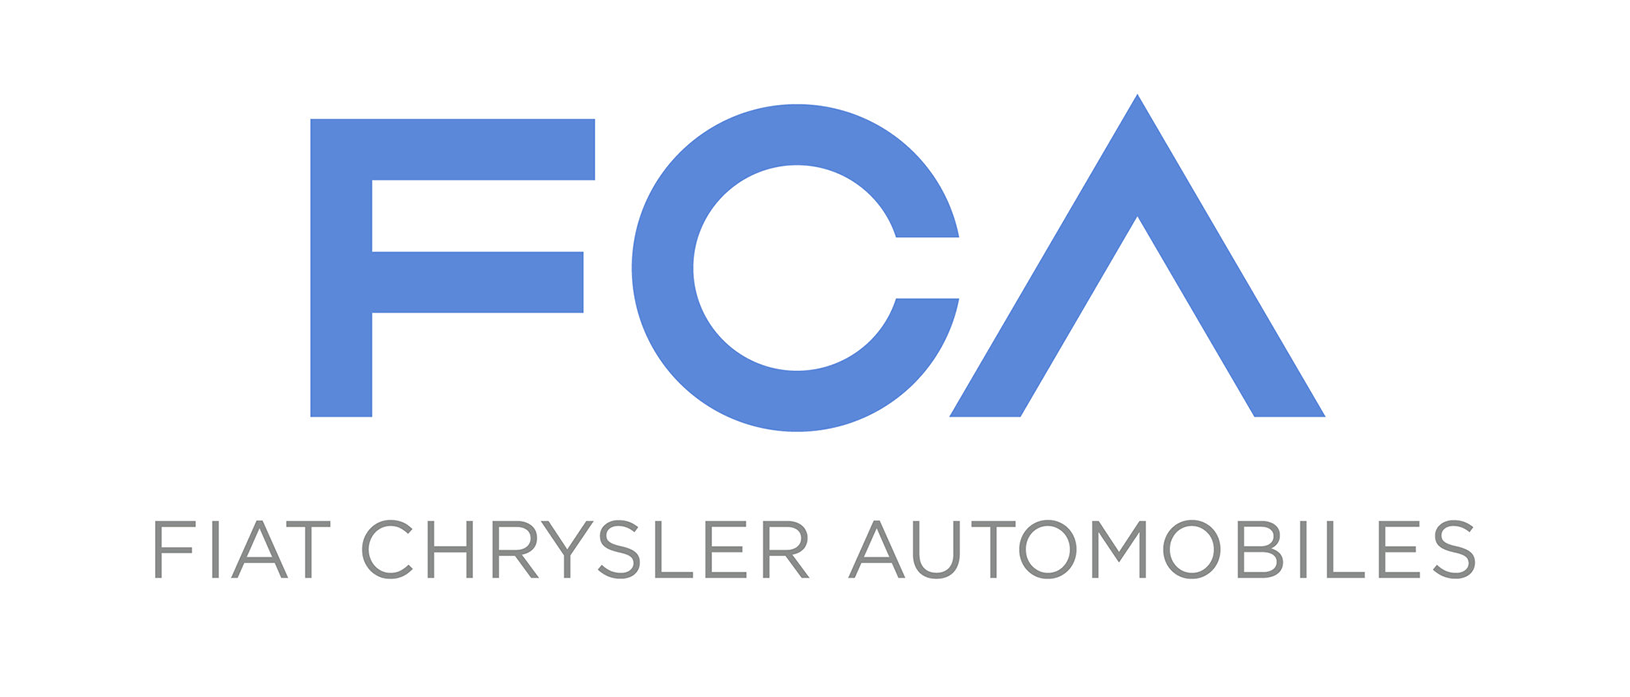 Fiat Chrysler Automobiles Expands Coronavirus-related Relief Actions; 1 Million Meals for School Children Included in New Programs